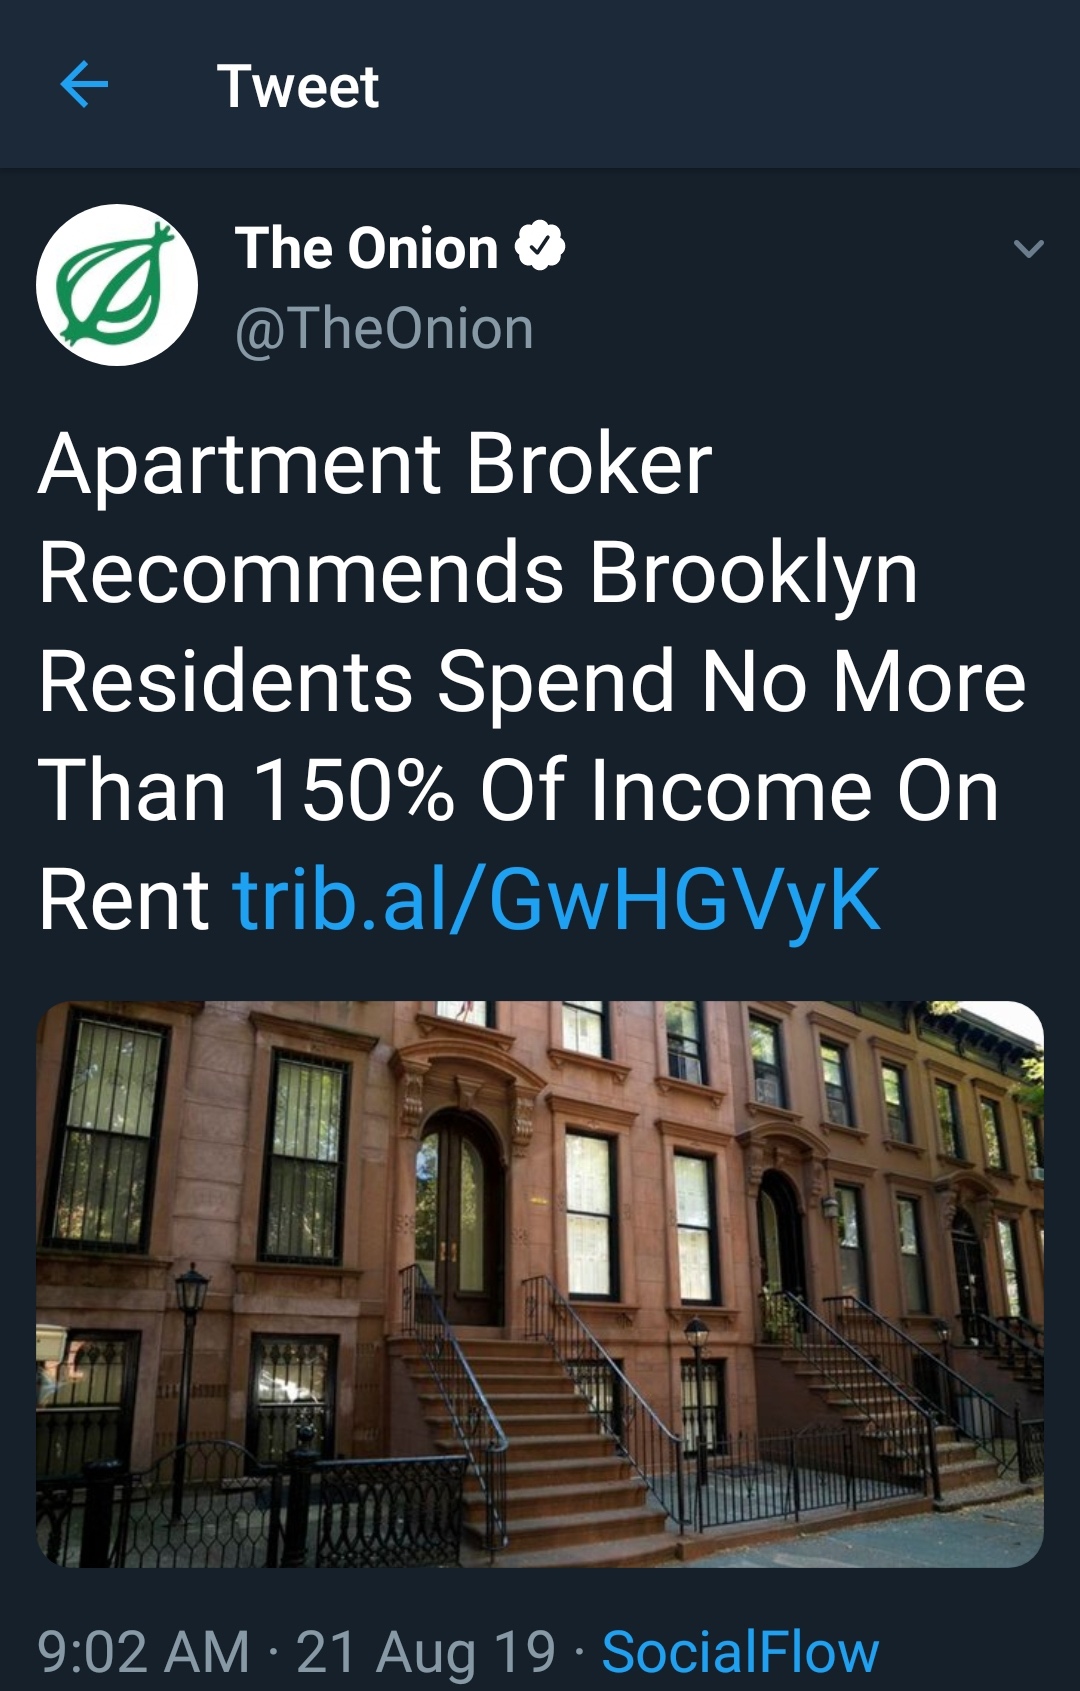 architecture - f Tweet The Onion Apartment Broker Recommends Brooklyn Residents Spend No More Than 150% Of Income On Rent trib.alGwHGVyK 21 Aug 19 SocialFlow